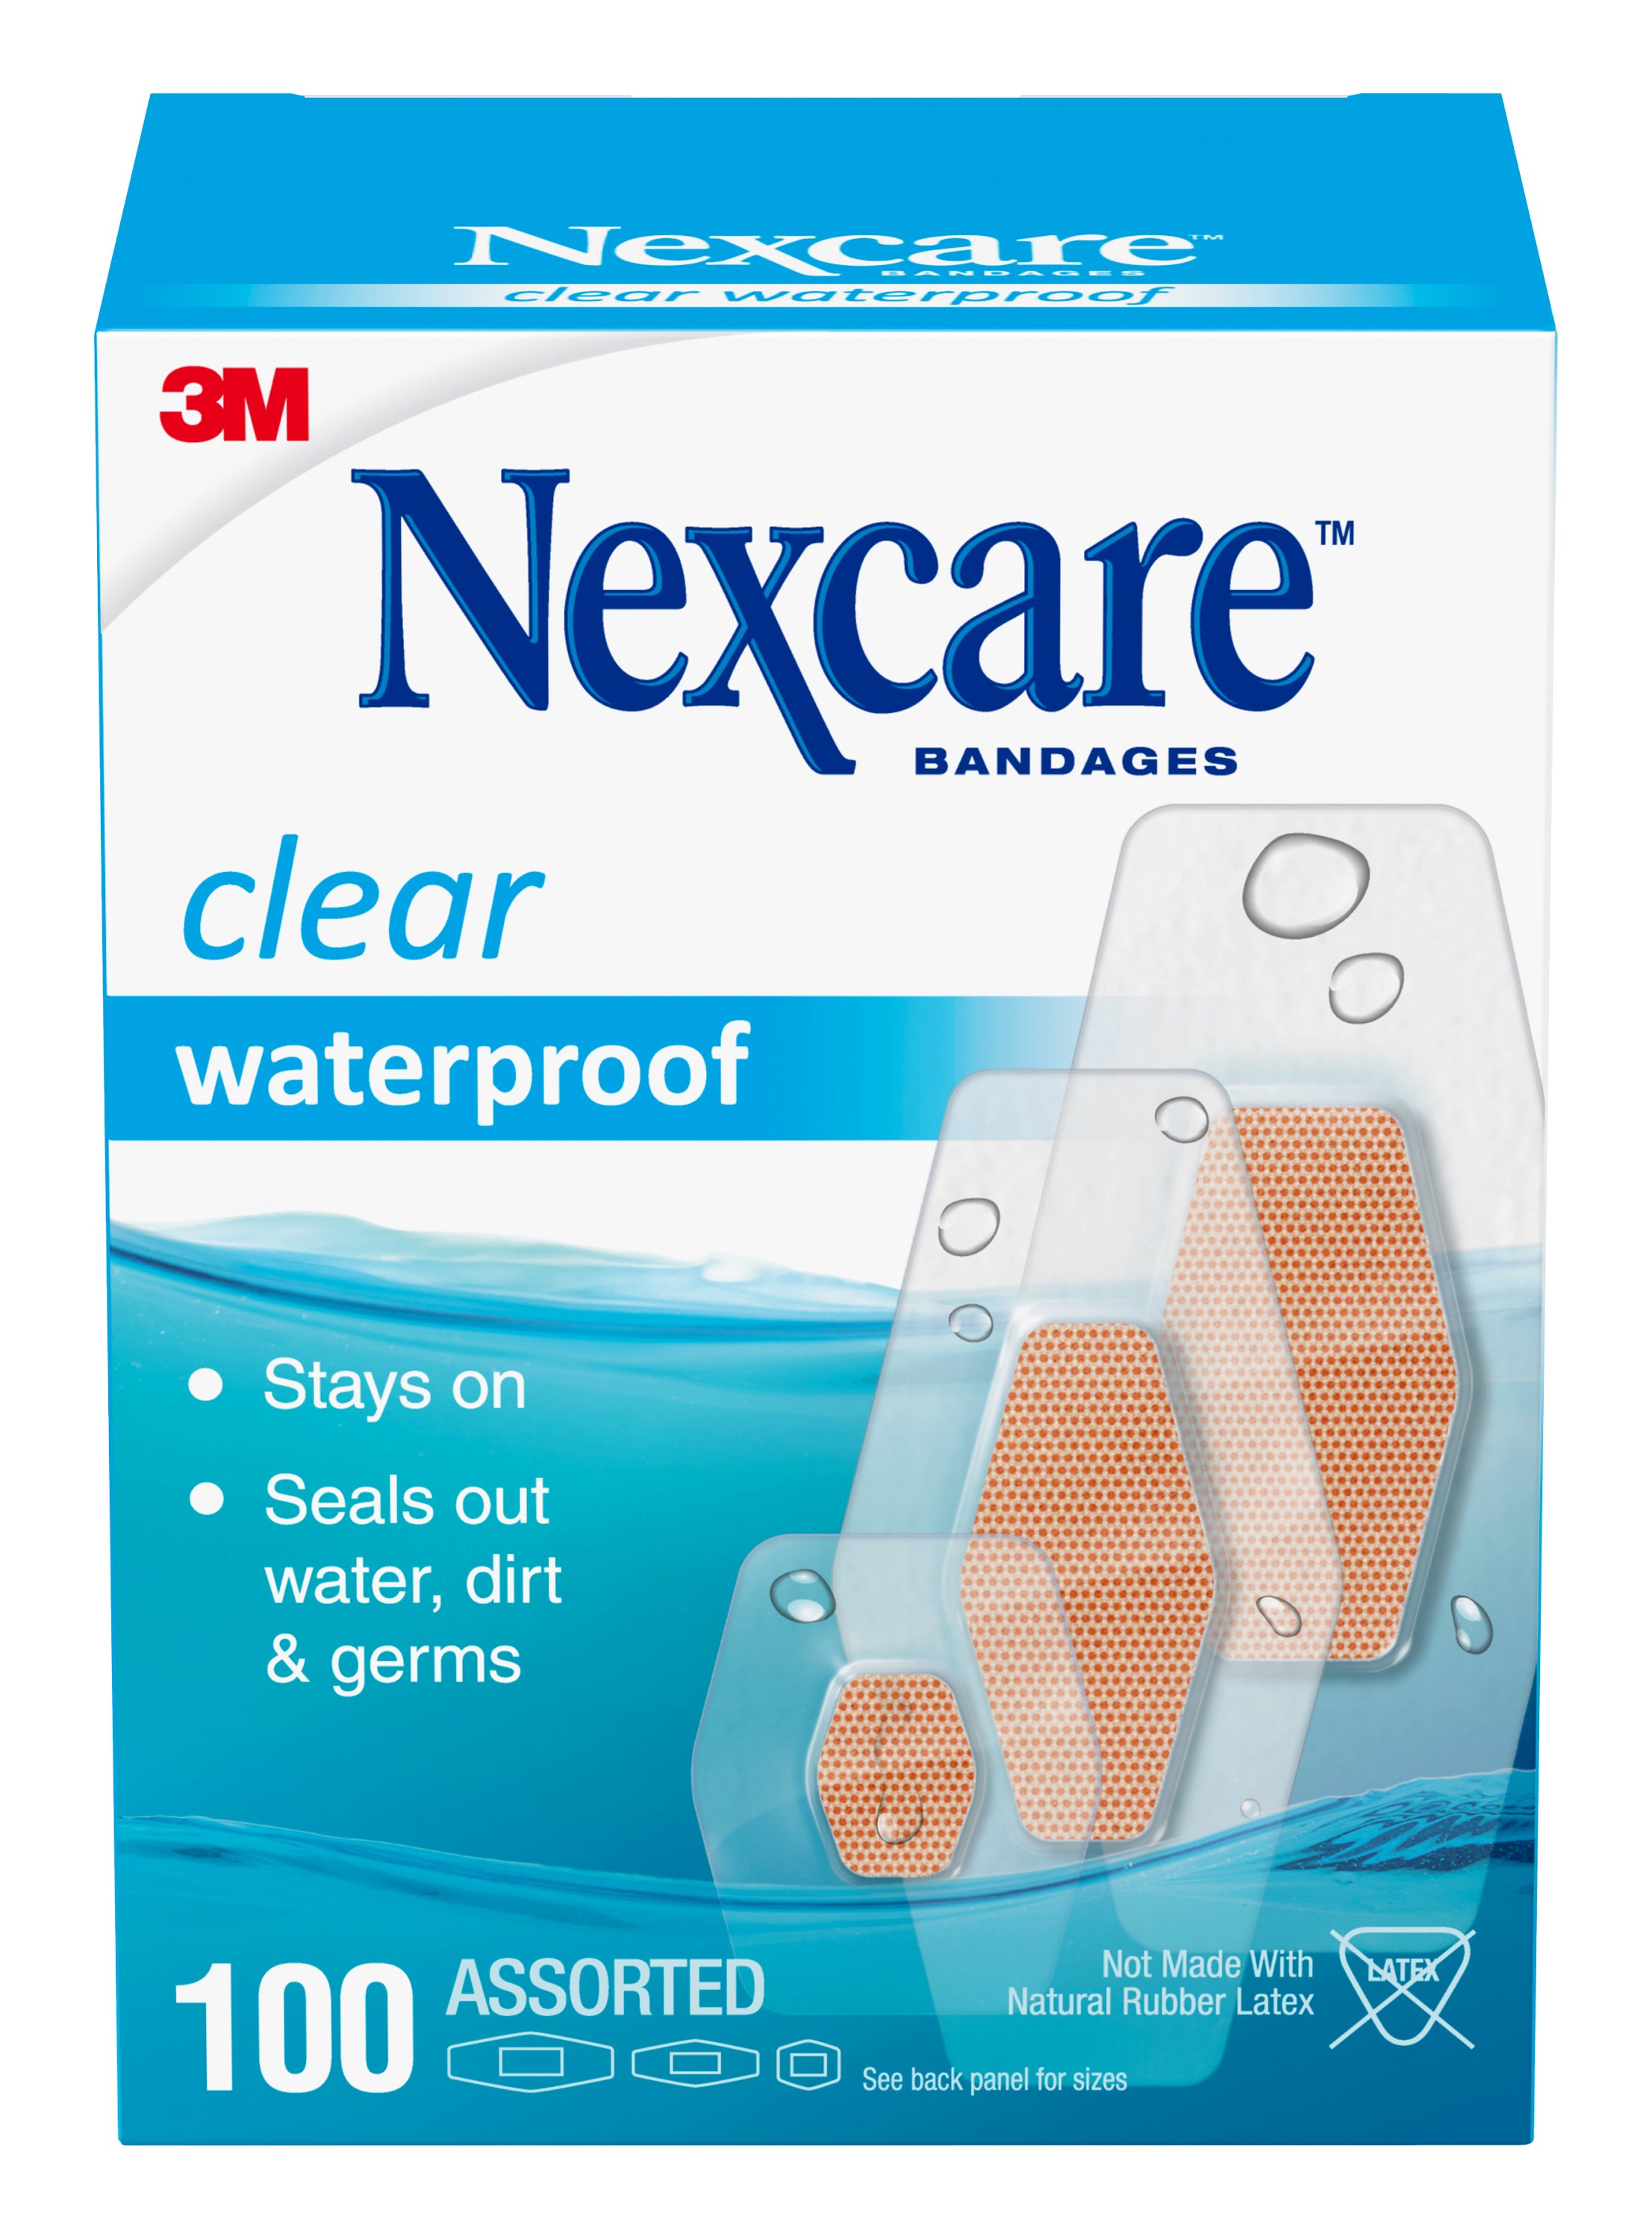 Nexcare Waterproof Bandages - Pack of 100 Bandages - image 1 of 17